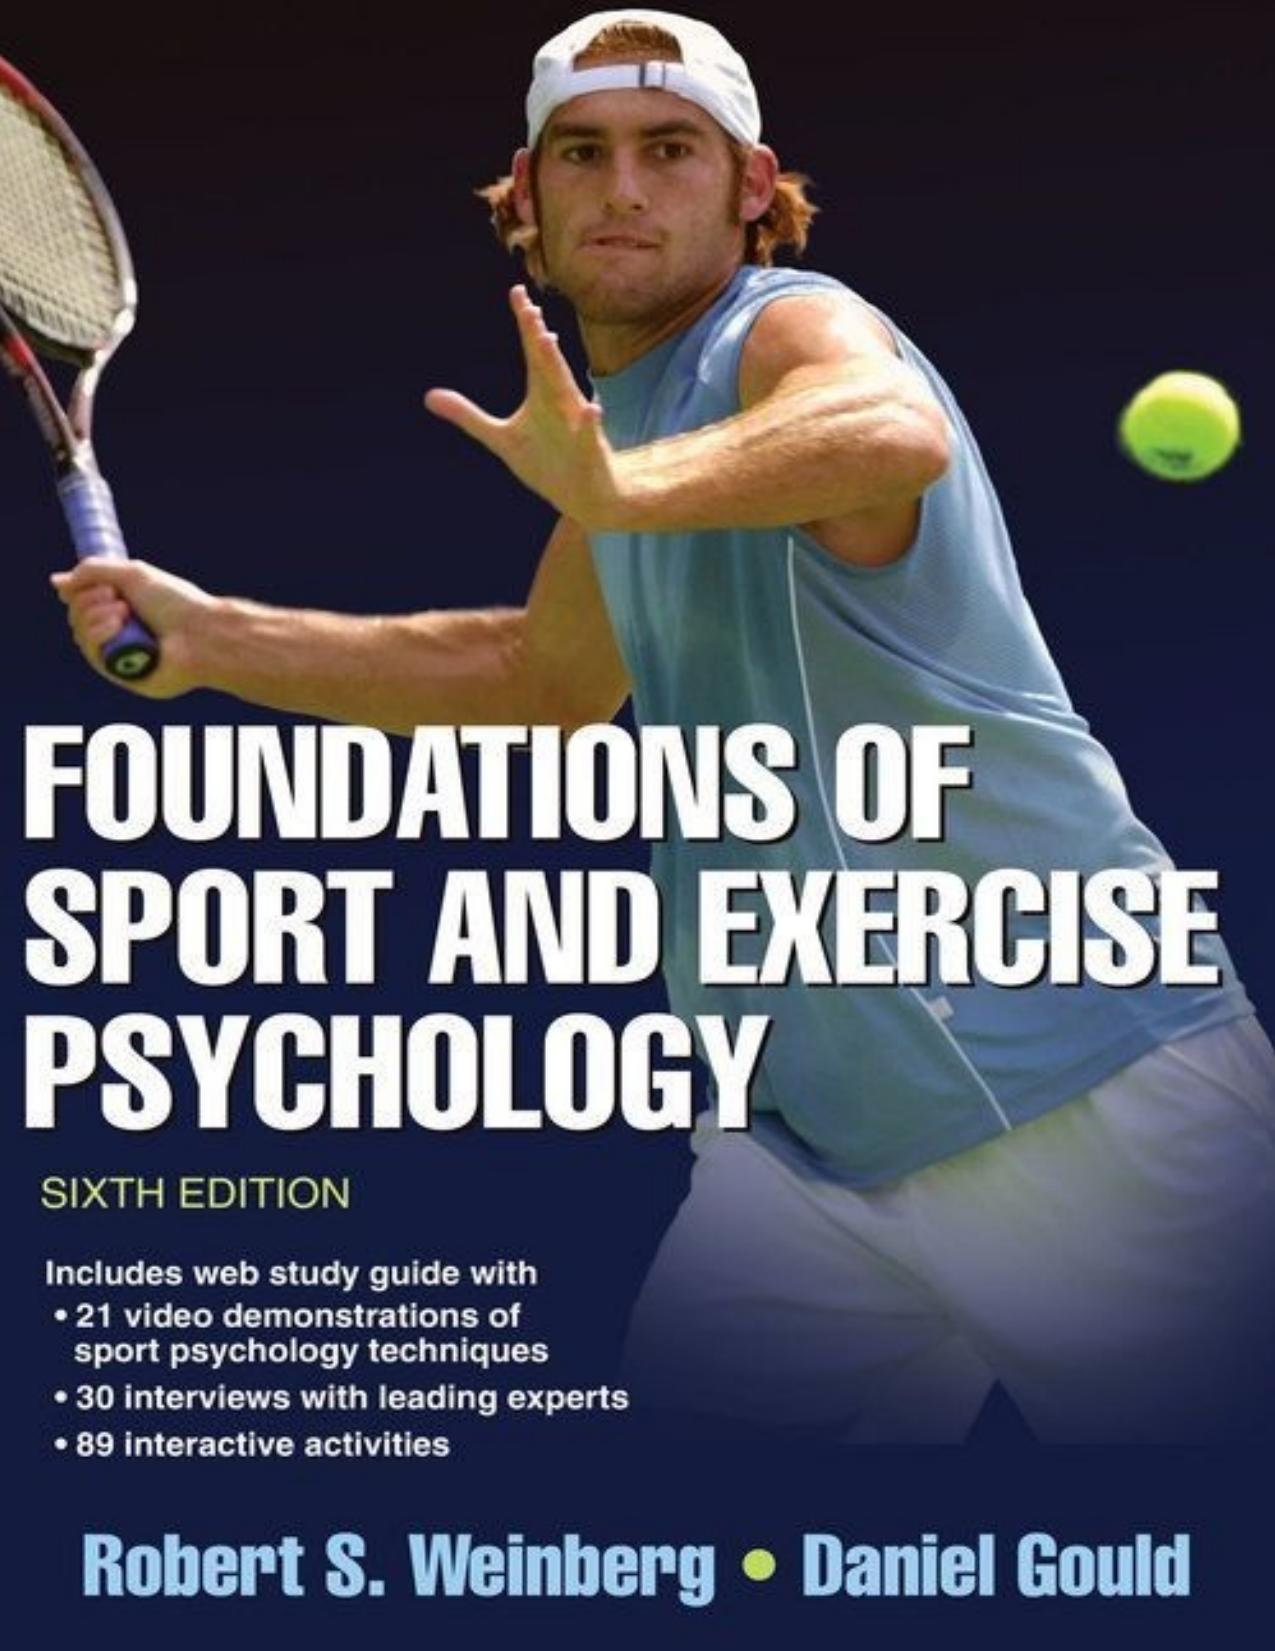 Foundations of Sport and Exercise Psychology, Sixth Edition